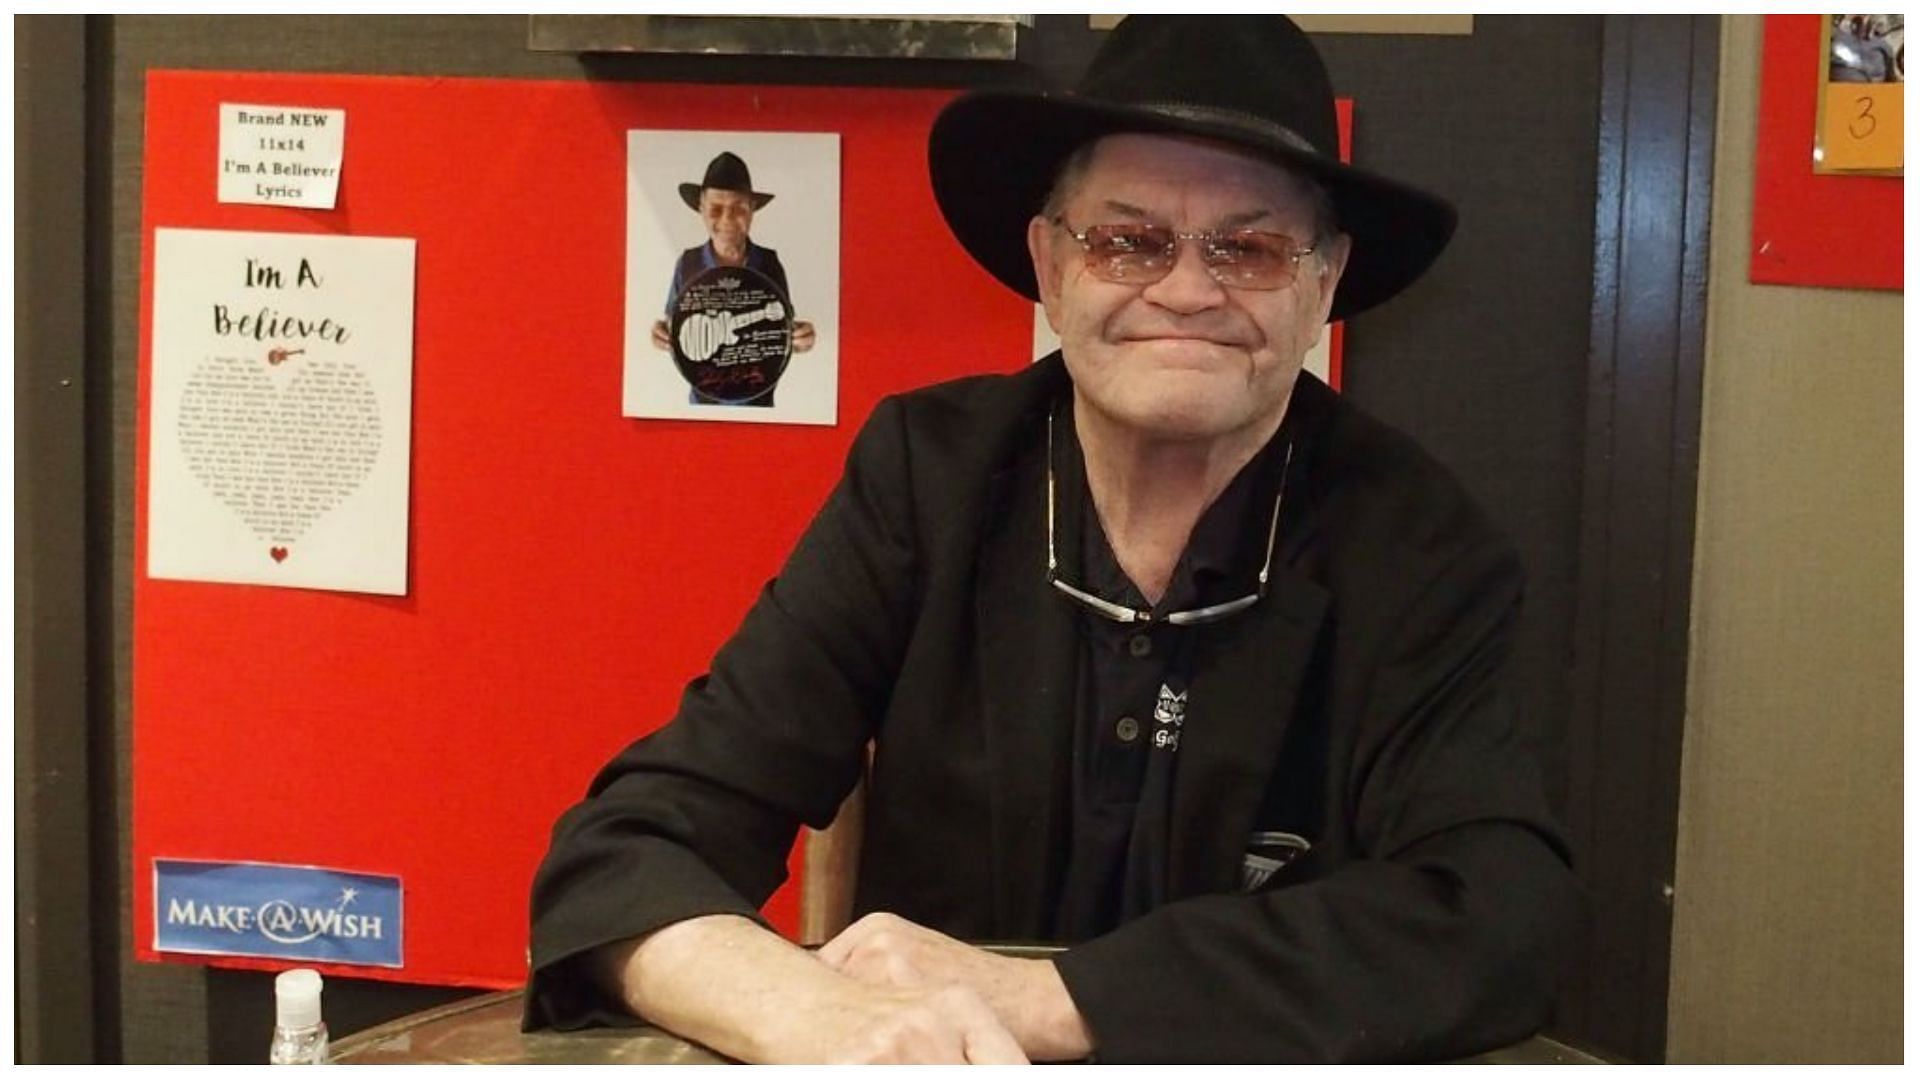 Micky Dolenz has sued the FBI to know what they were investigating about the Monkees (Image via Bobby Bank/Getty Images)